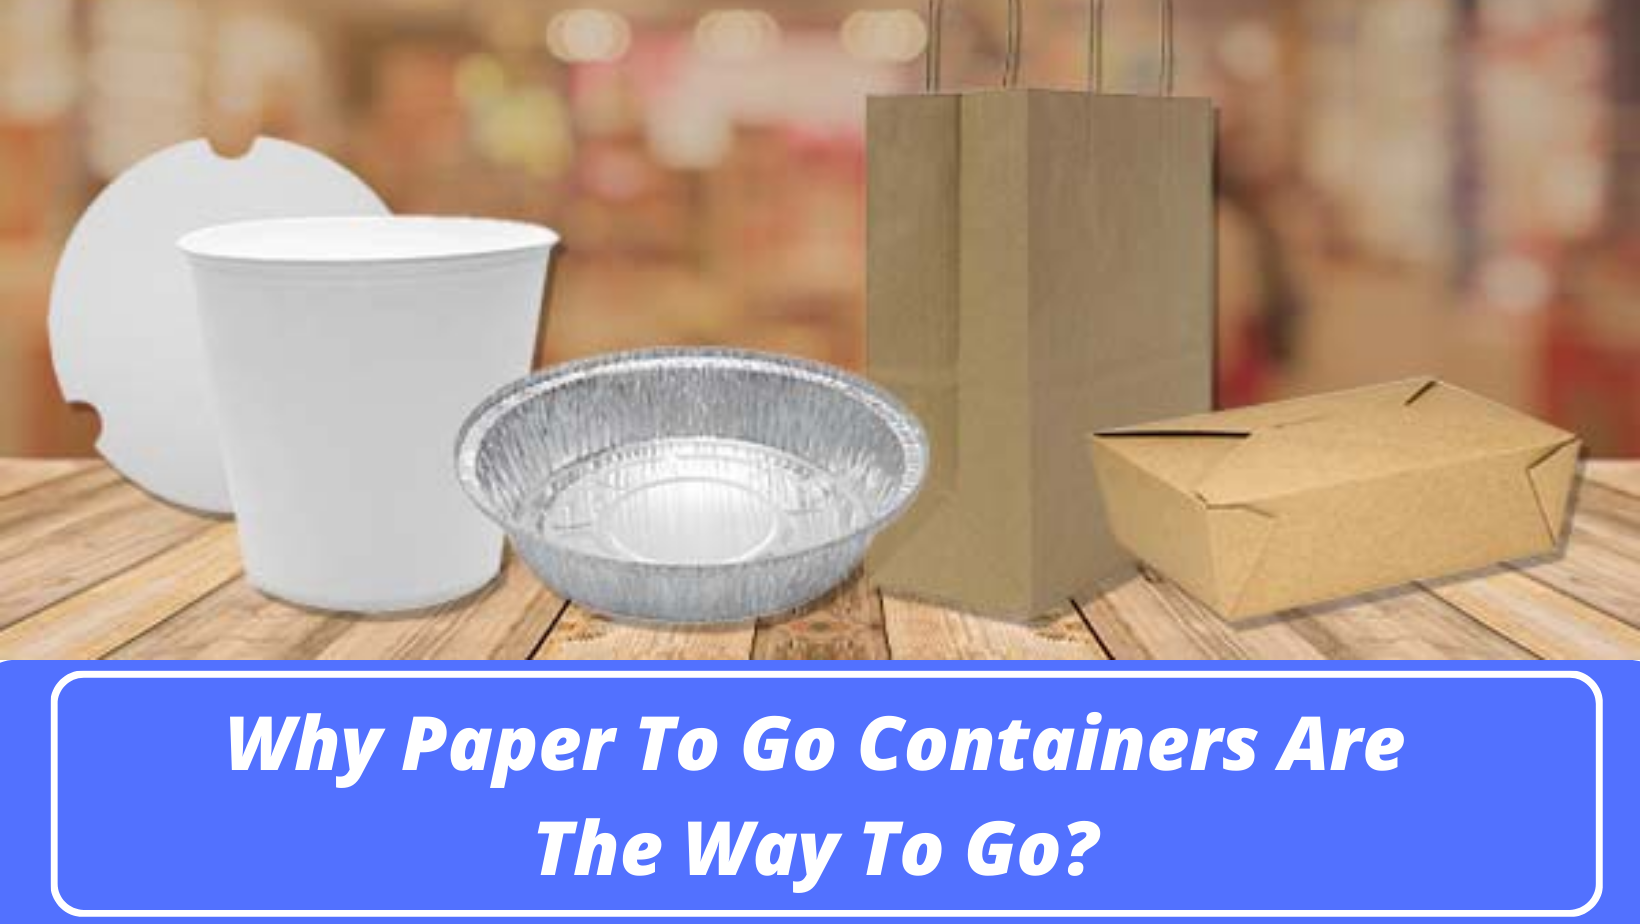 Buy Wholesale China Disposable Food Container Hot Professional